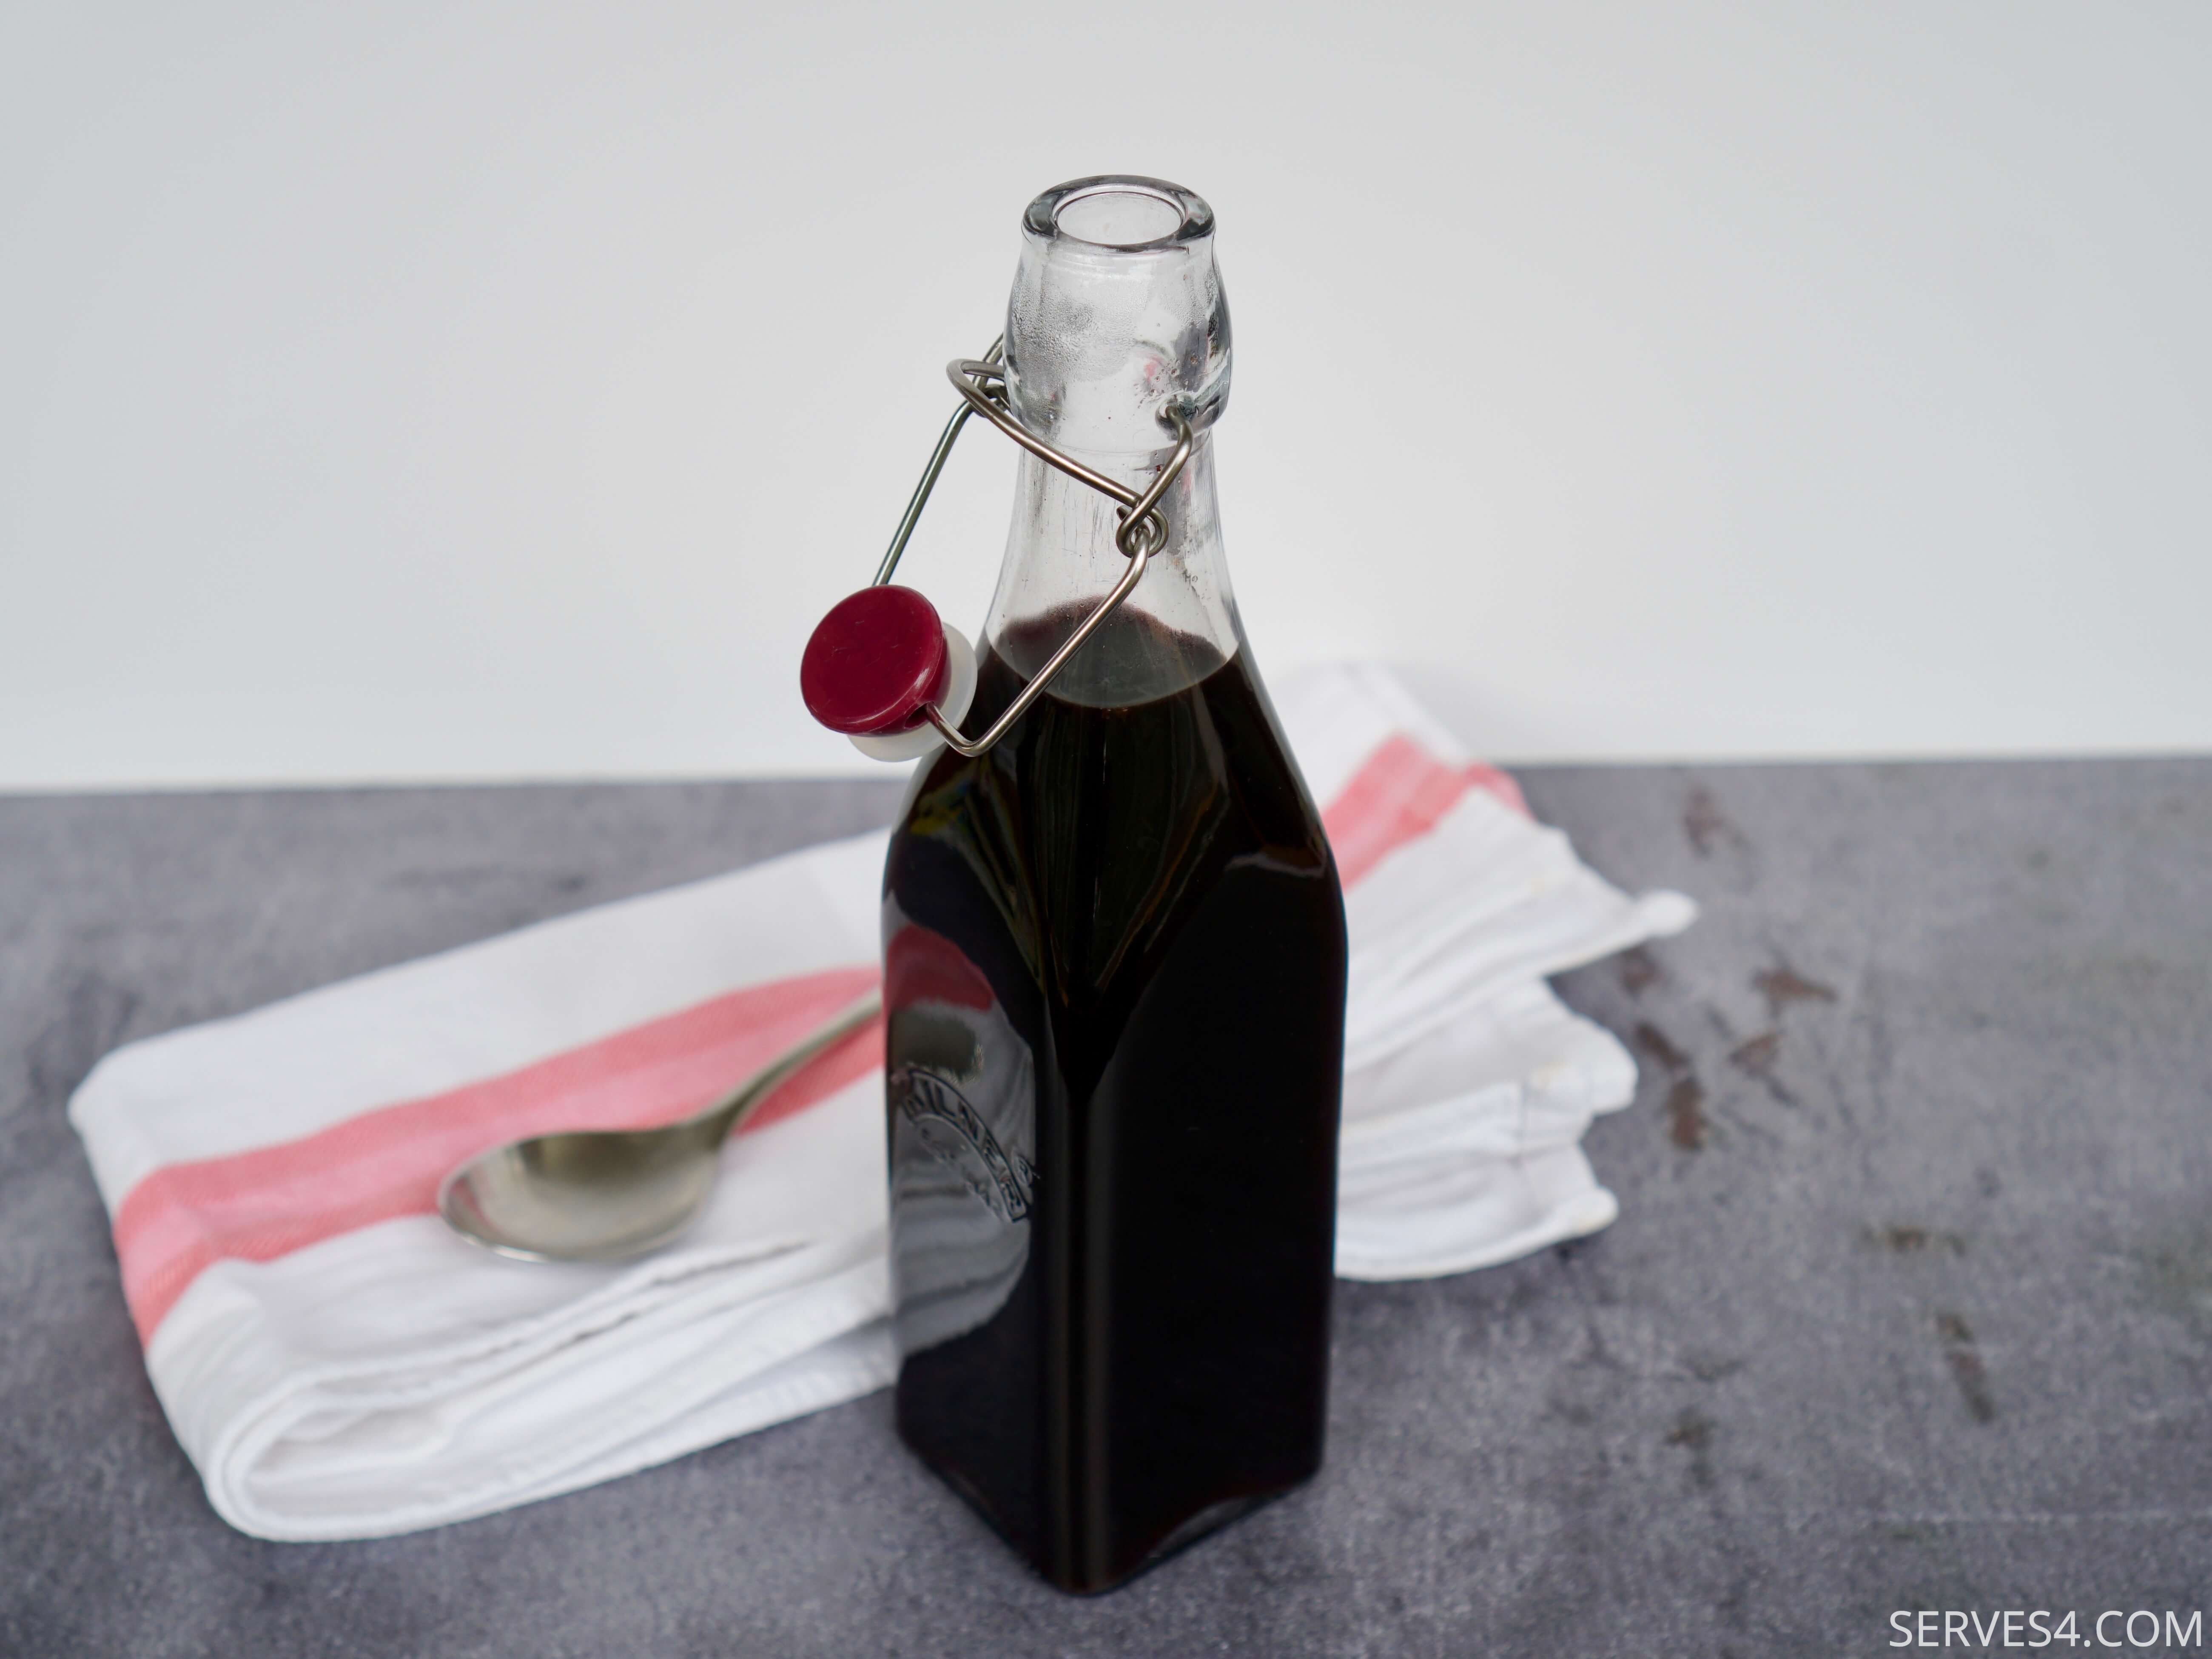 Give your immunity a boost with this easy homemade elderberry syrup.